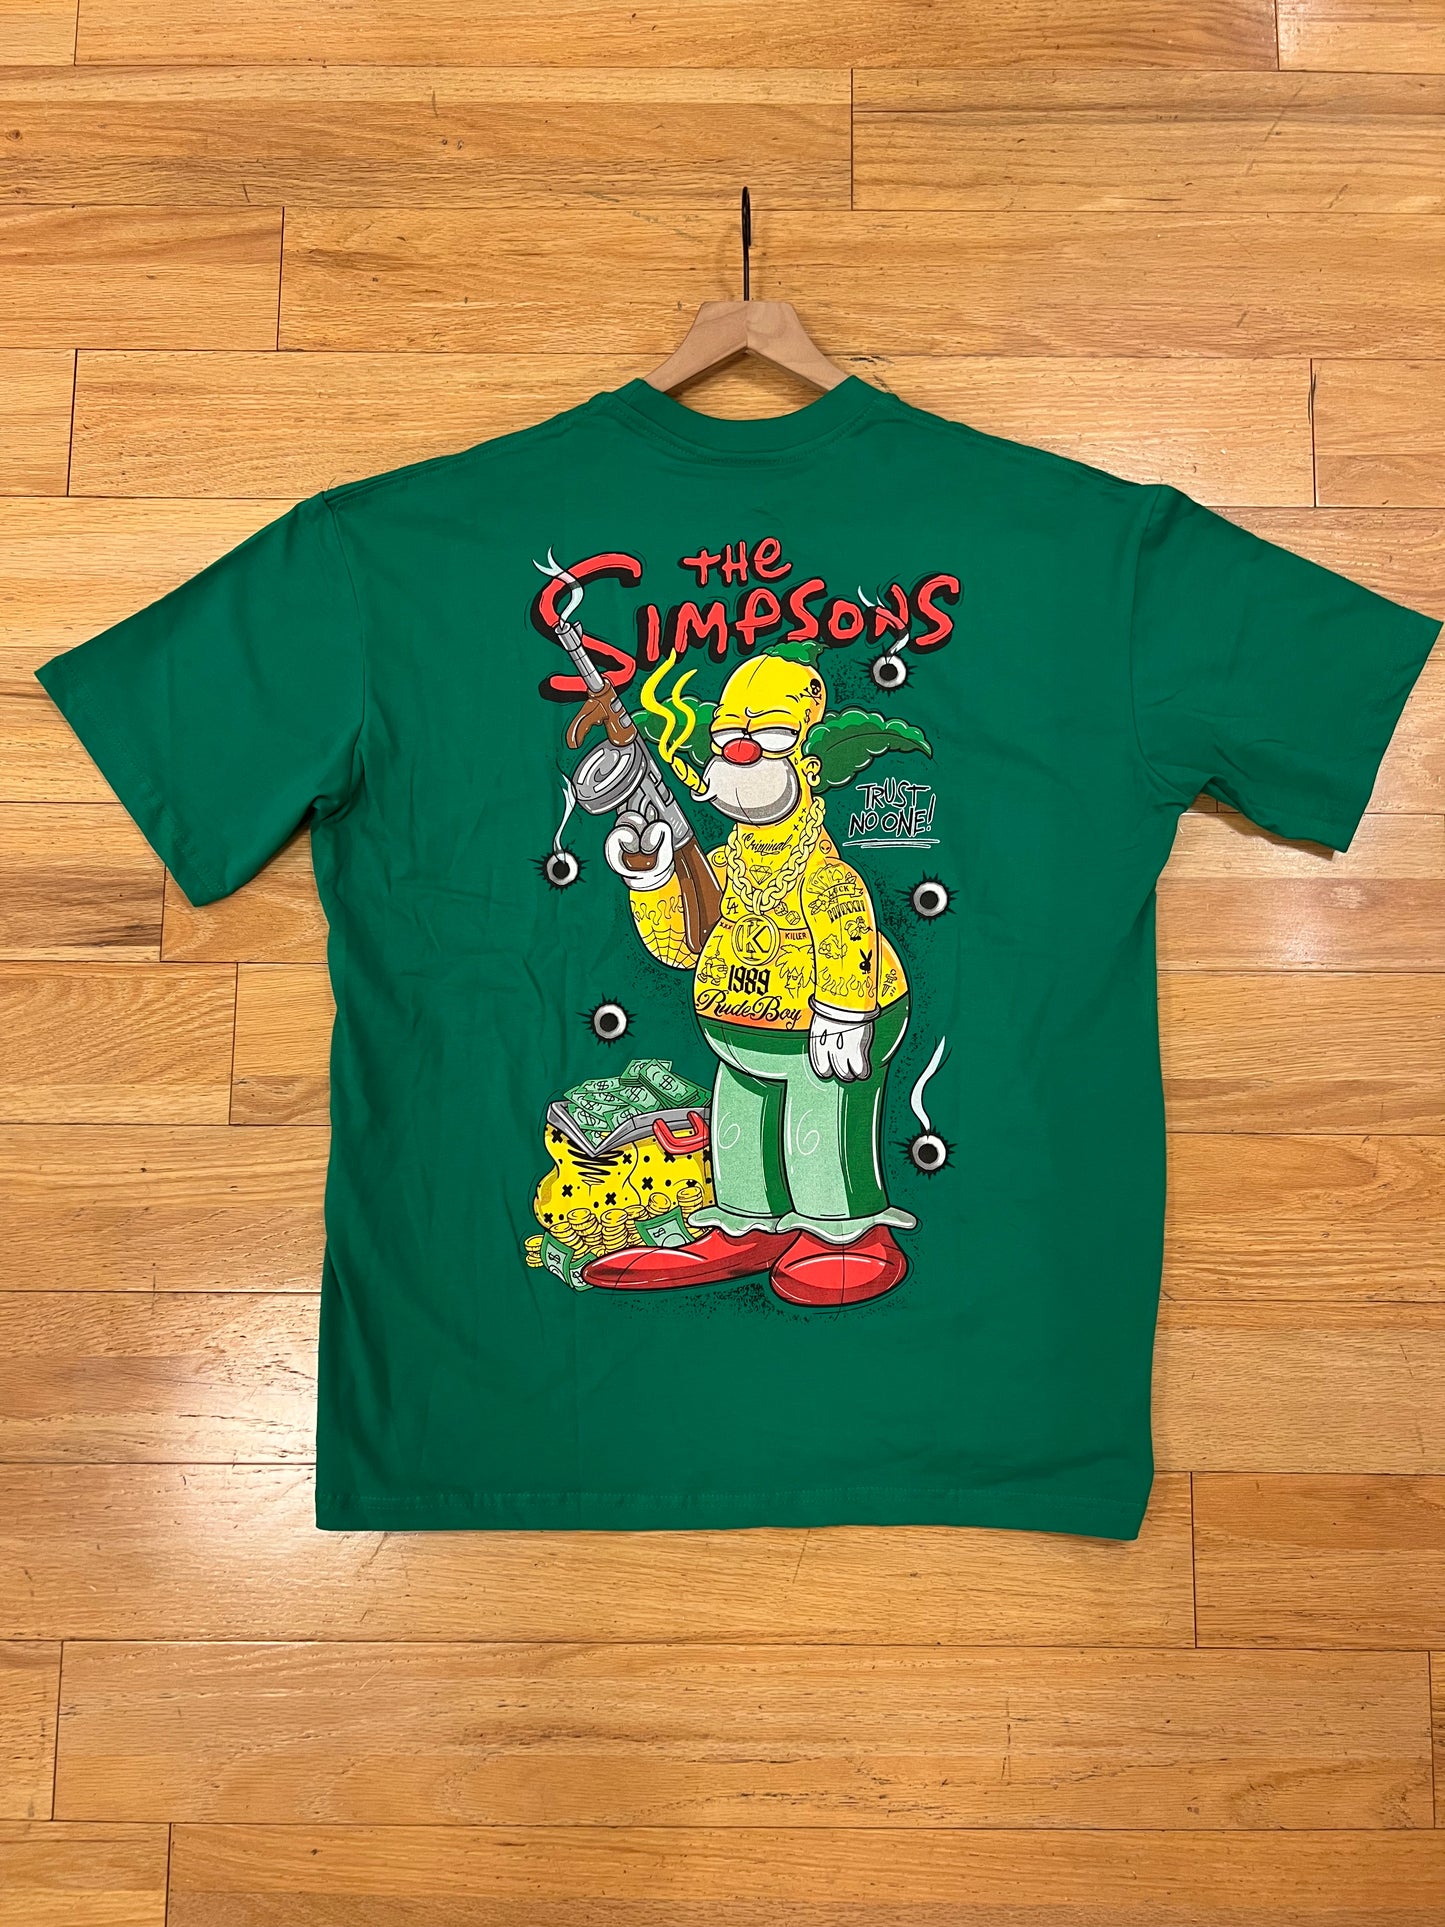 The Simpsons shirt